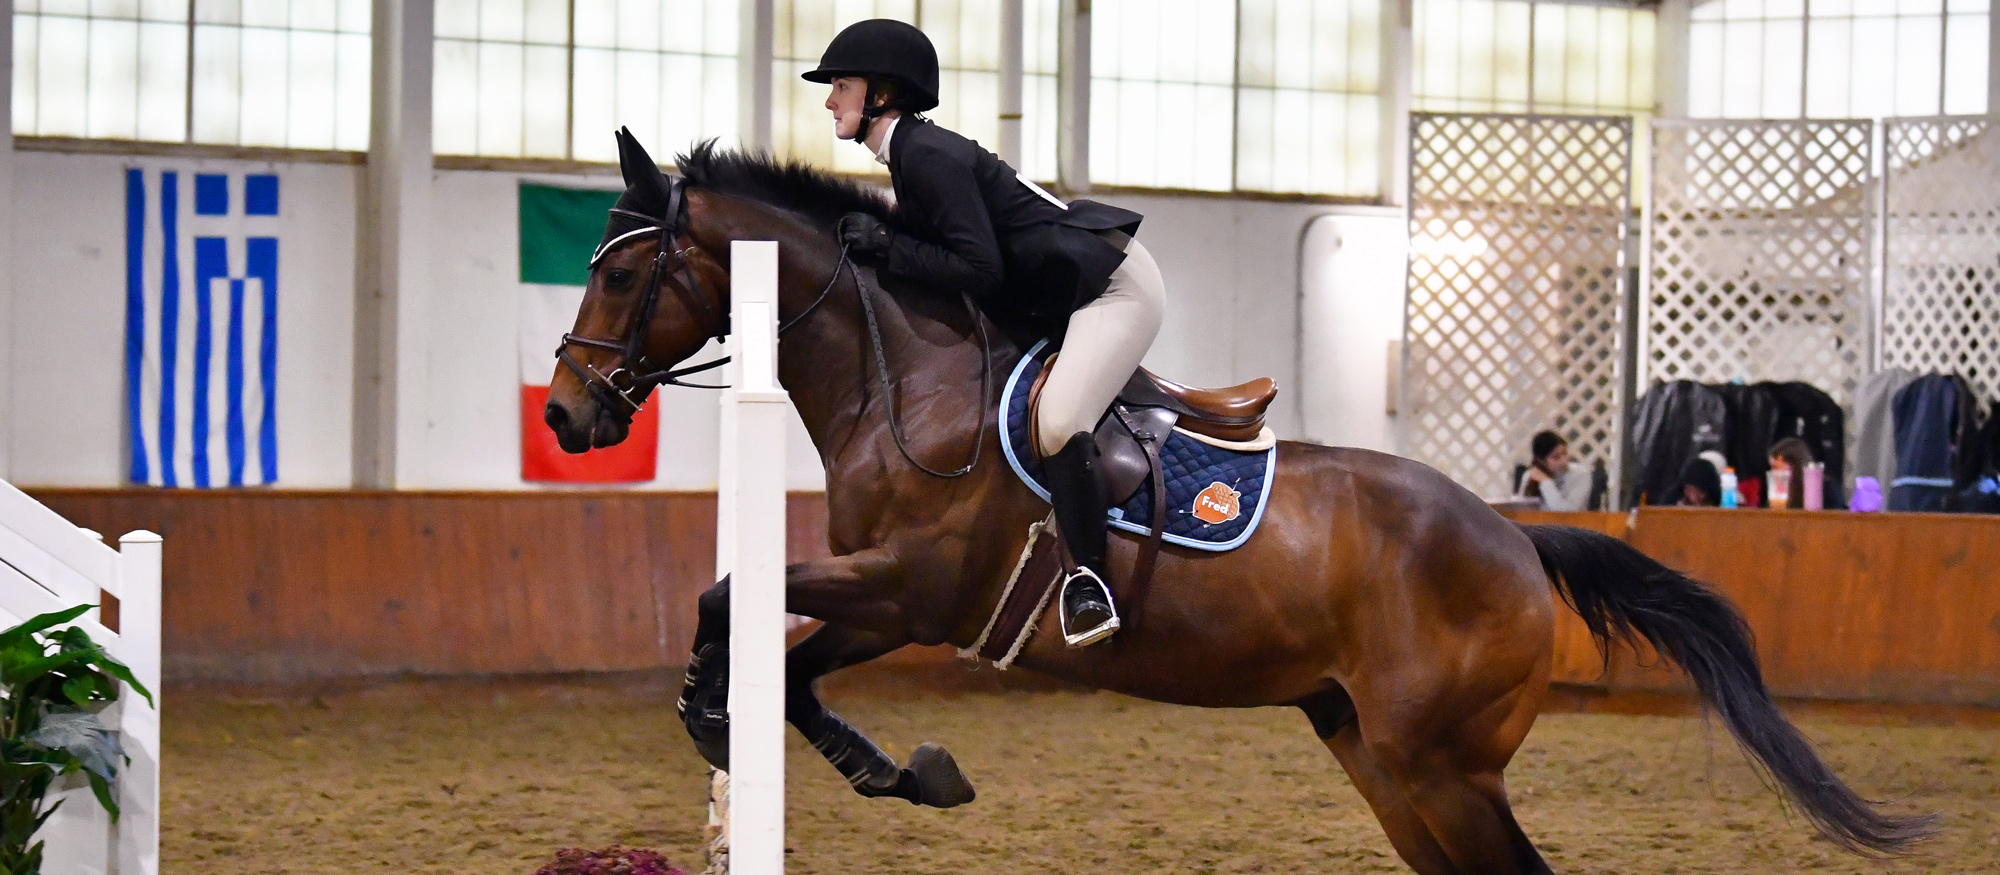 The Mount Holyoke College equestrian team's fourth home show of the year, scheduled for March 4, has been cancelled. (RJB Sports file photo)